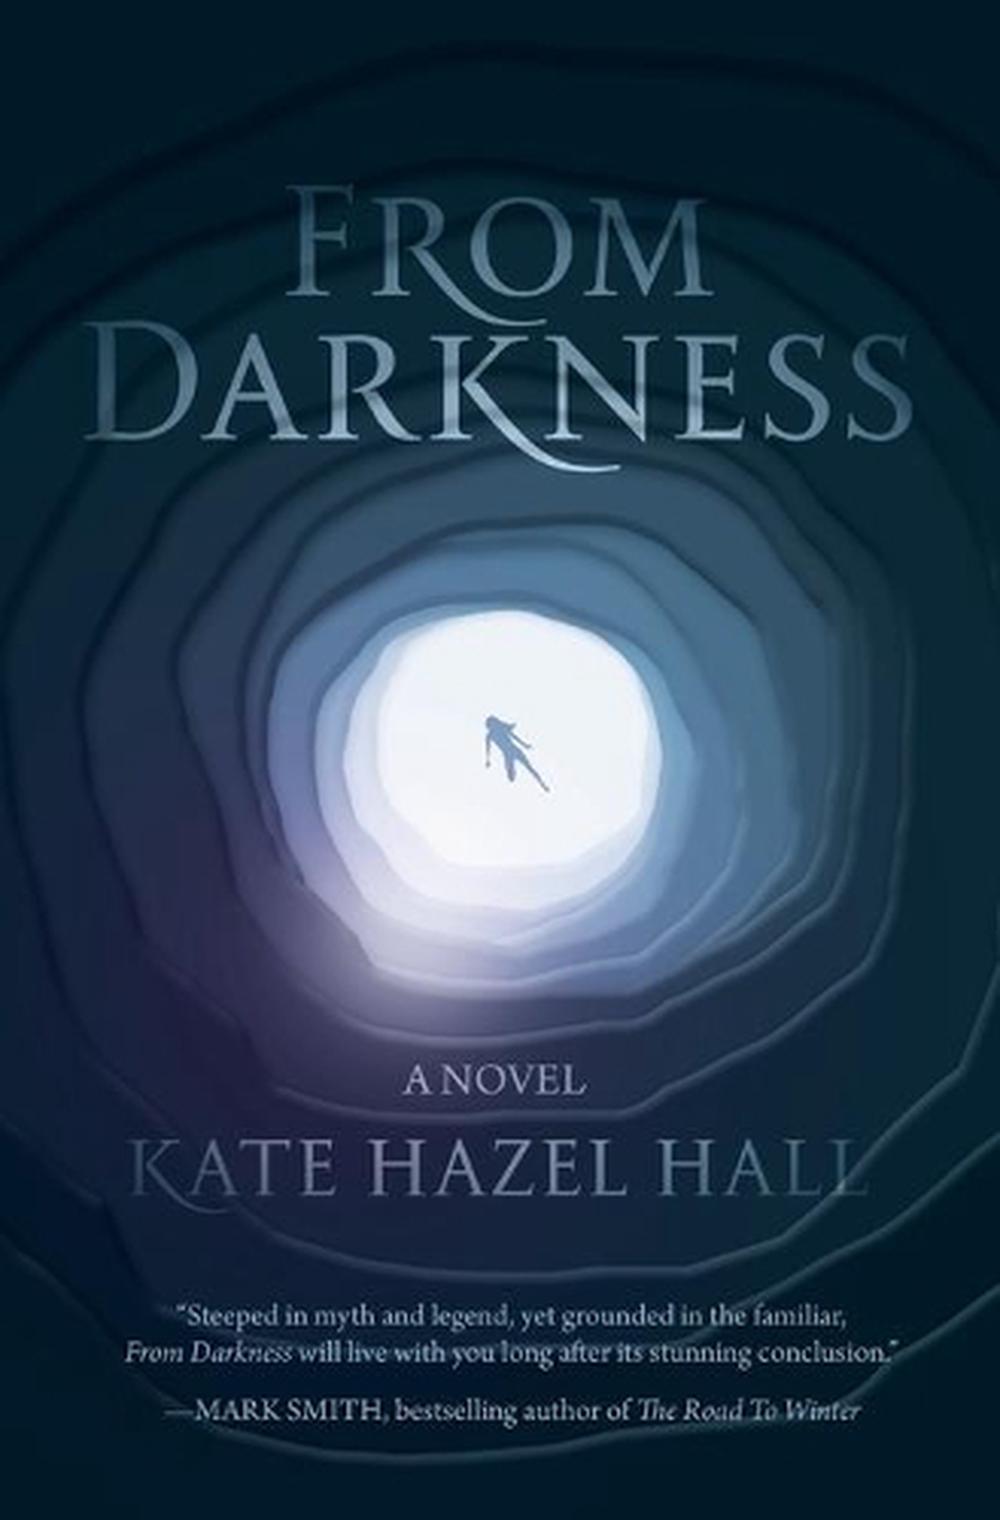 Out of Darkness by Kate Kiesler